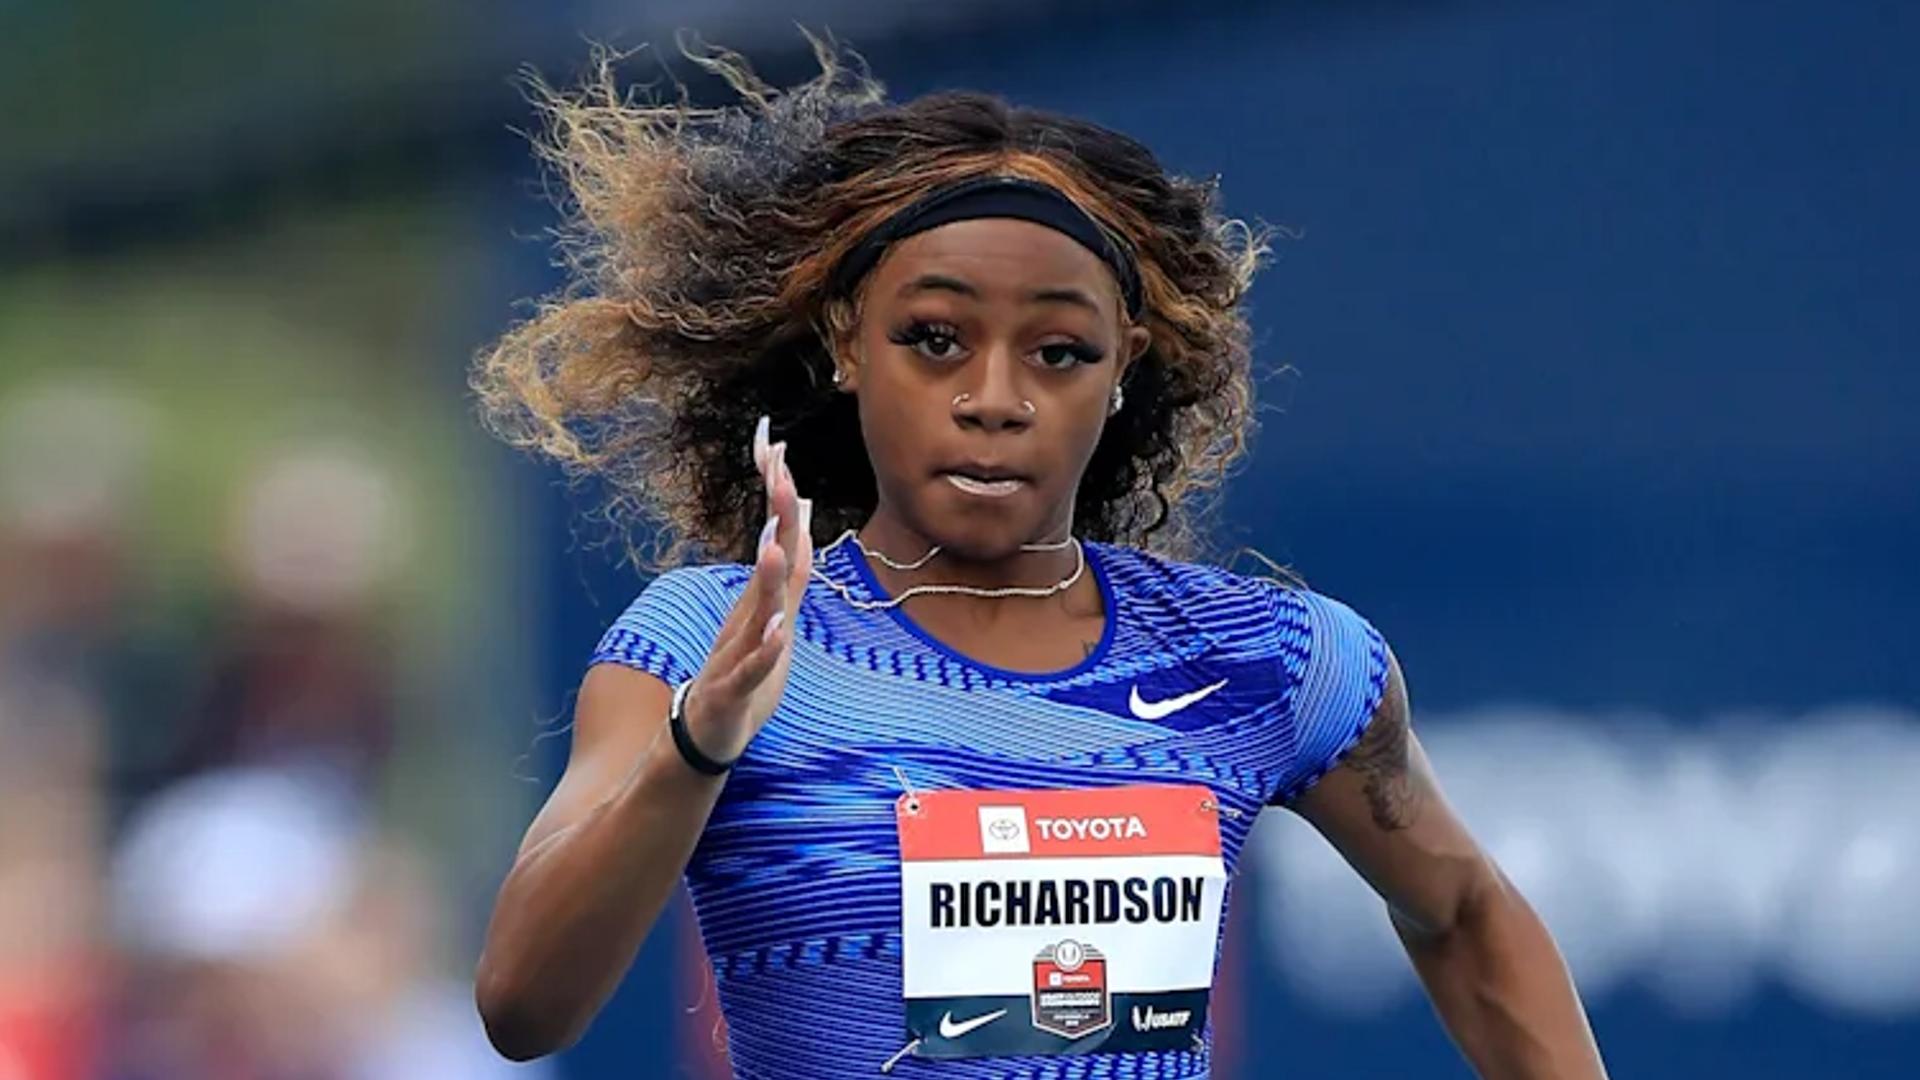 Who is Sha'Carri Richardson's girlfriend? Know everything about her